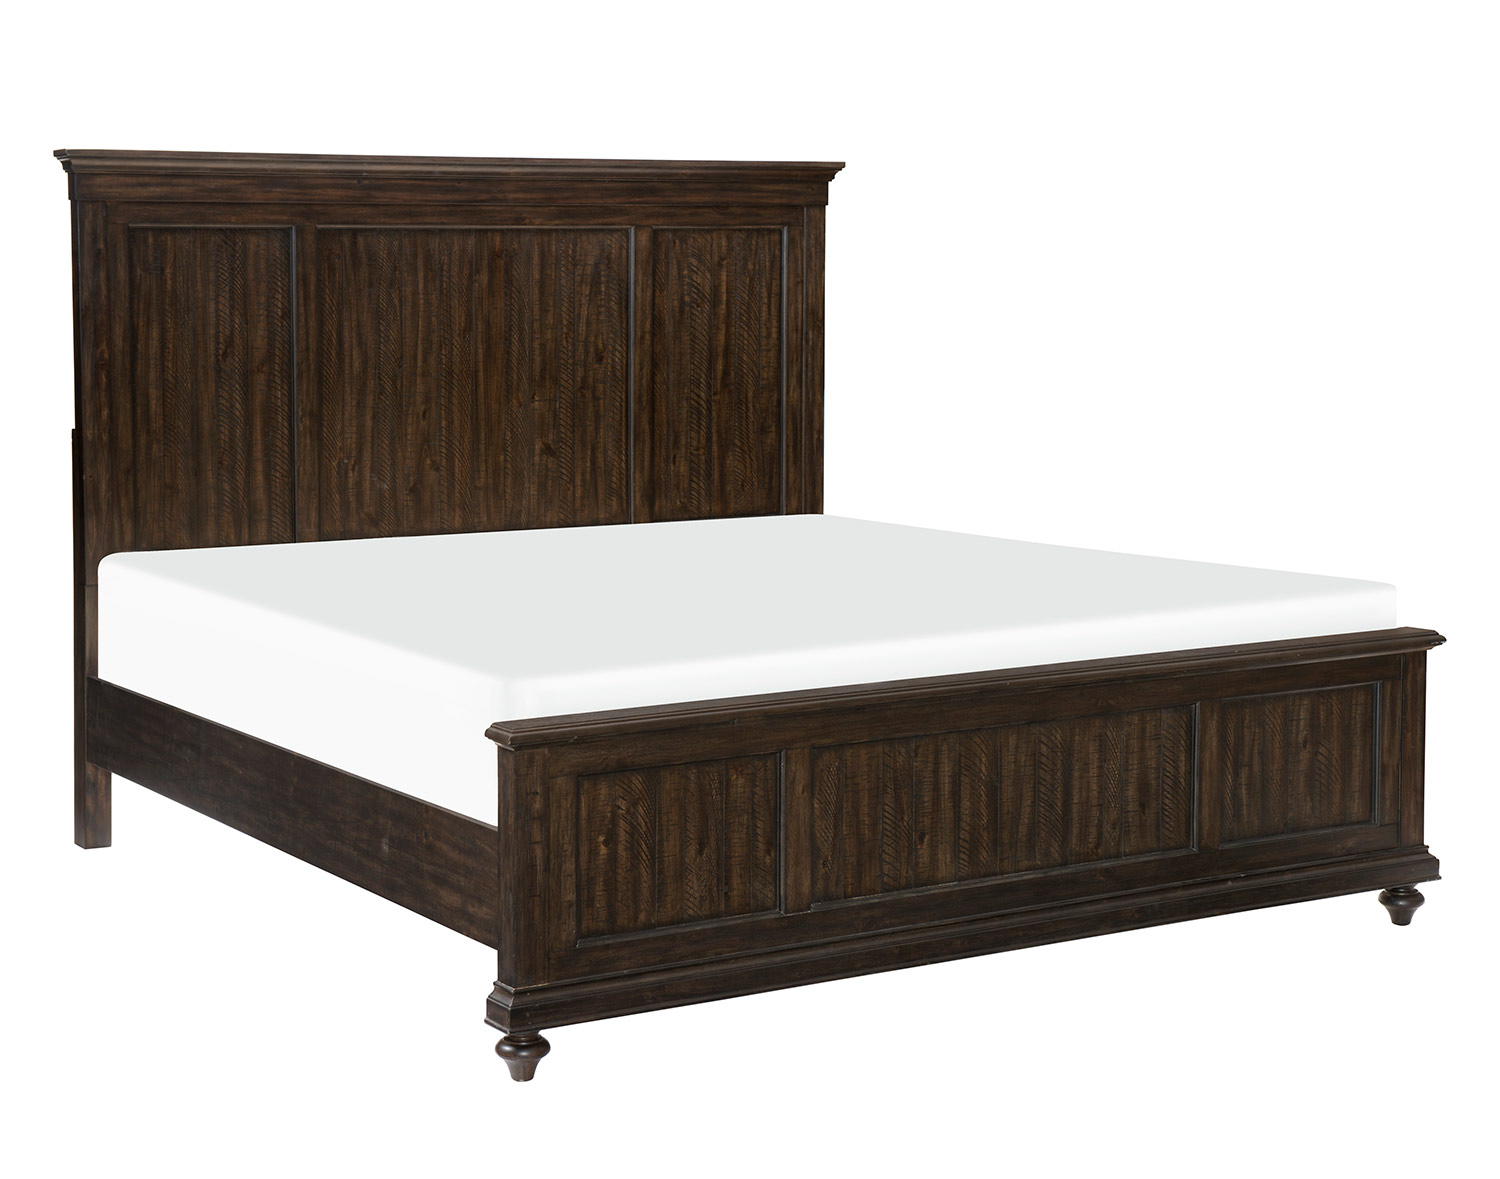 Homelegance Cardano Bed - Driftwood Charcoal over Acacia Solids and Veneers